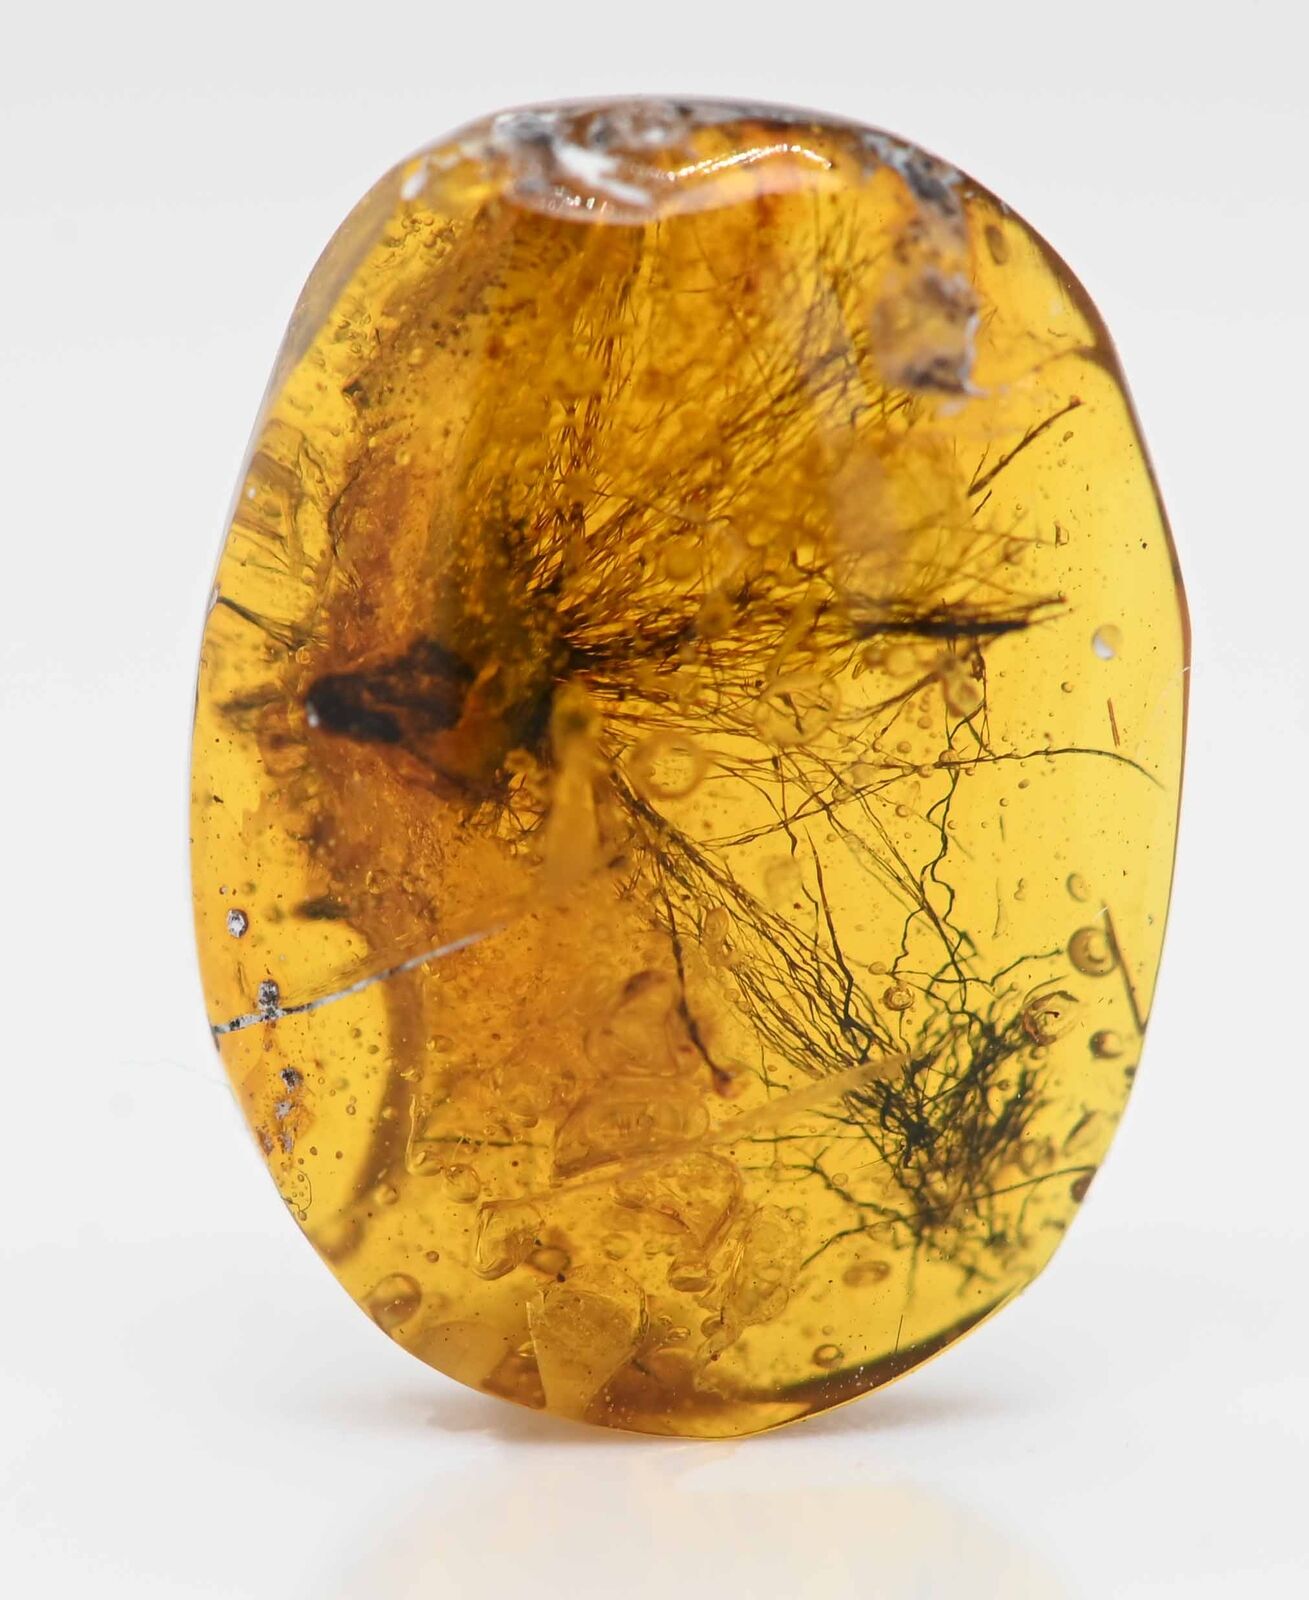 Rare Dandelion seed, Fossil Inclusion in Burmese Amber